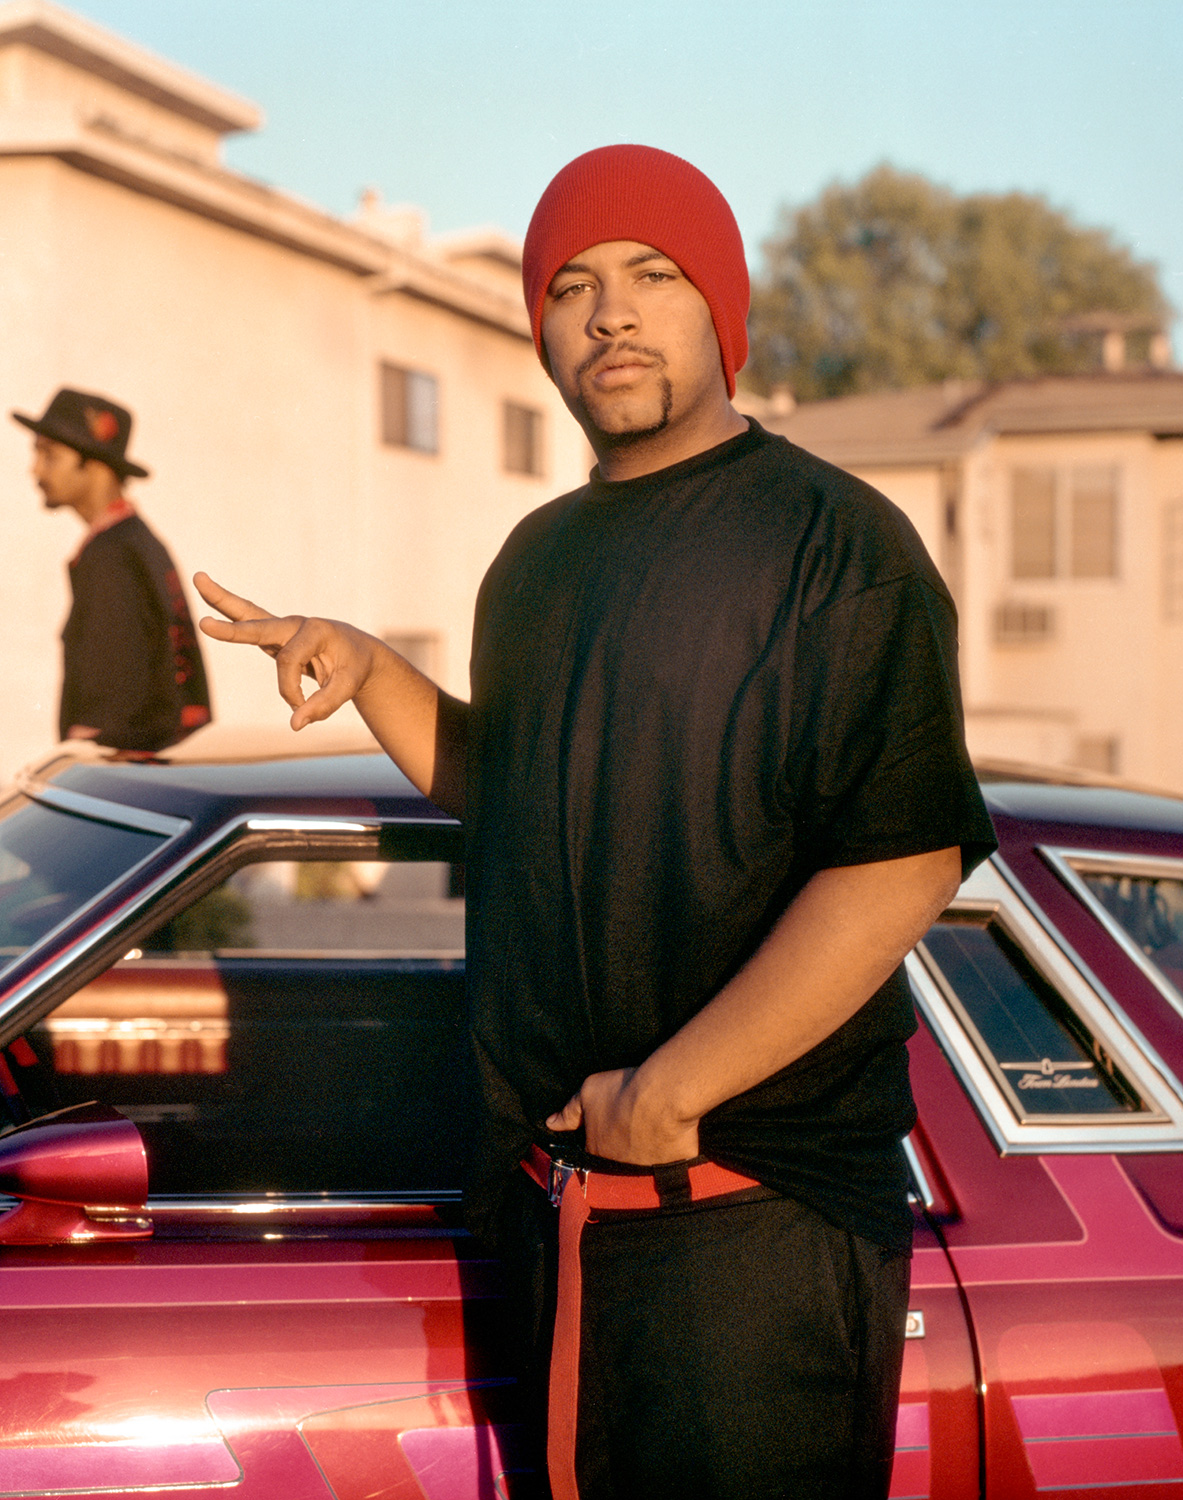  Blood, Los Angeles. The craziness of the ‘colors’ era was coming to a close; Bloods and Crips had days before made a very public truce, and were sealing it with a rap album collaboration. I was in LA, shooting street portraits of Angeleno cultural ‘